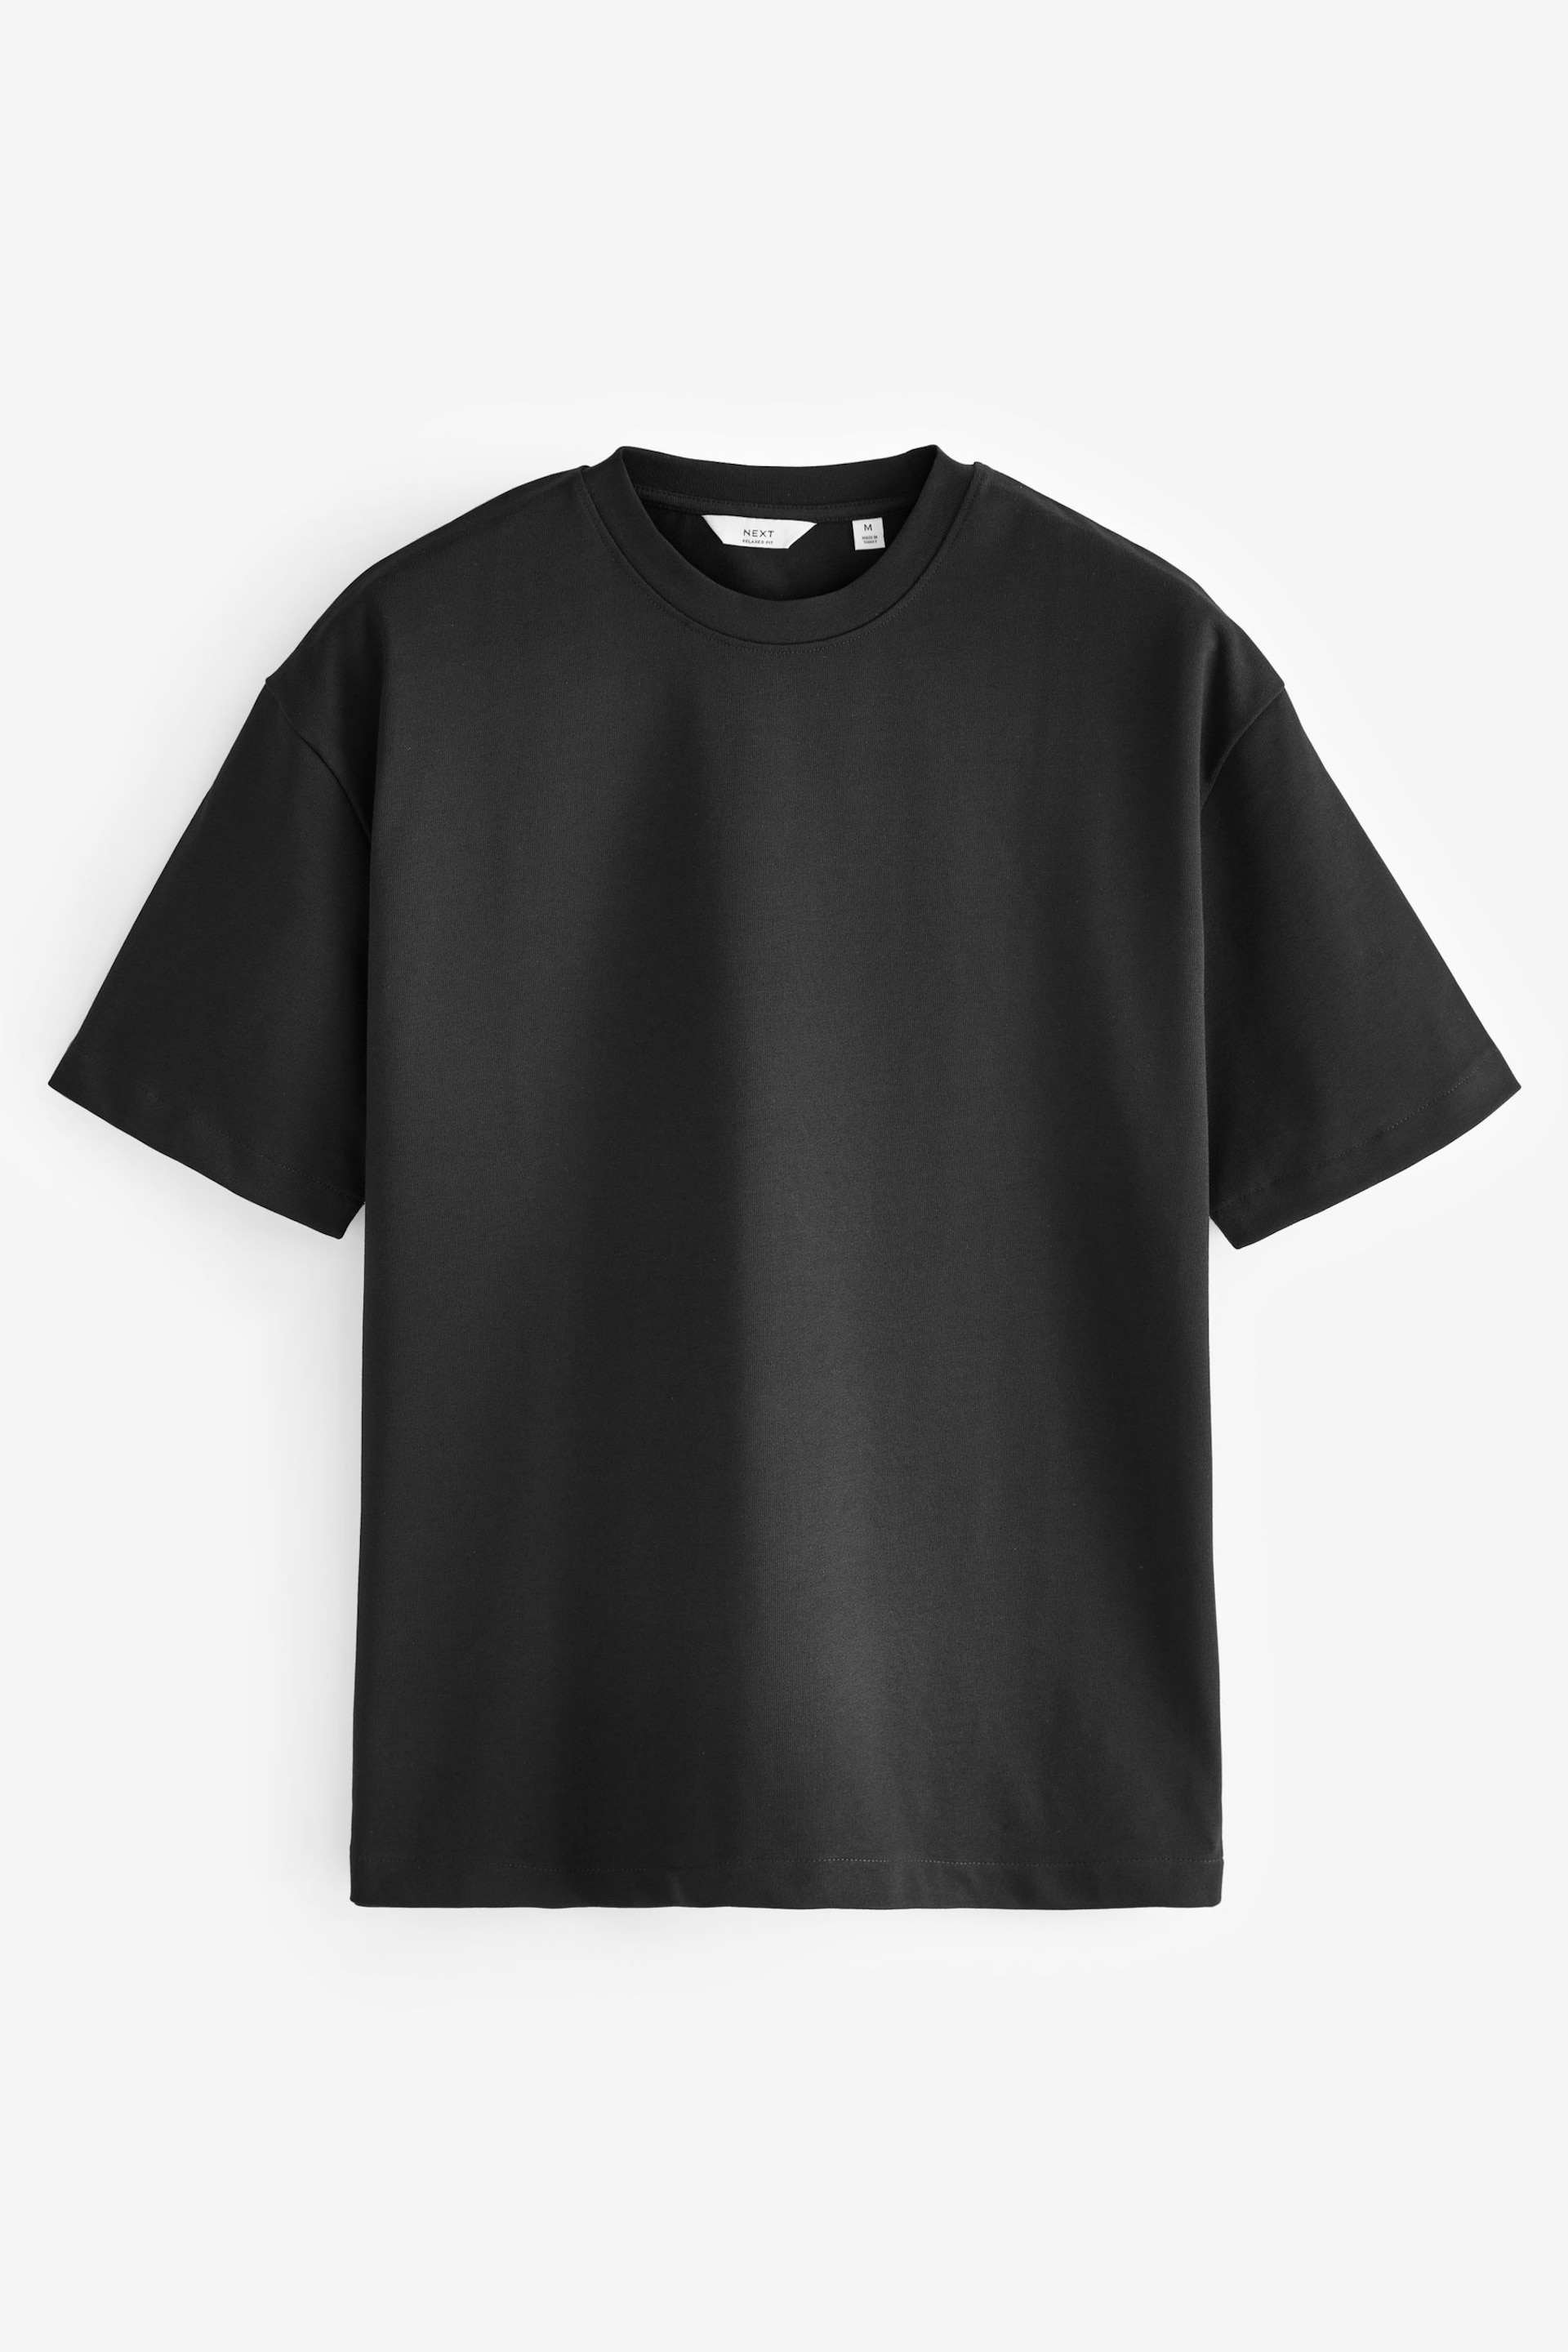 Black Relaxed Fit Heavyweight T-Shirts 3 Pack - Image 6 of 10